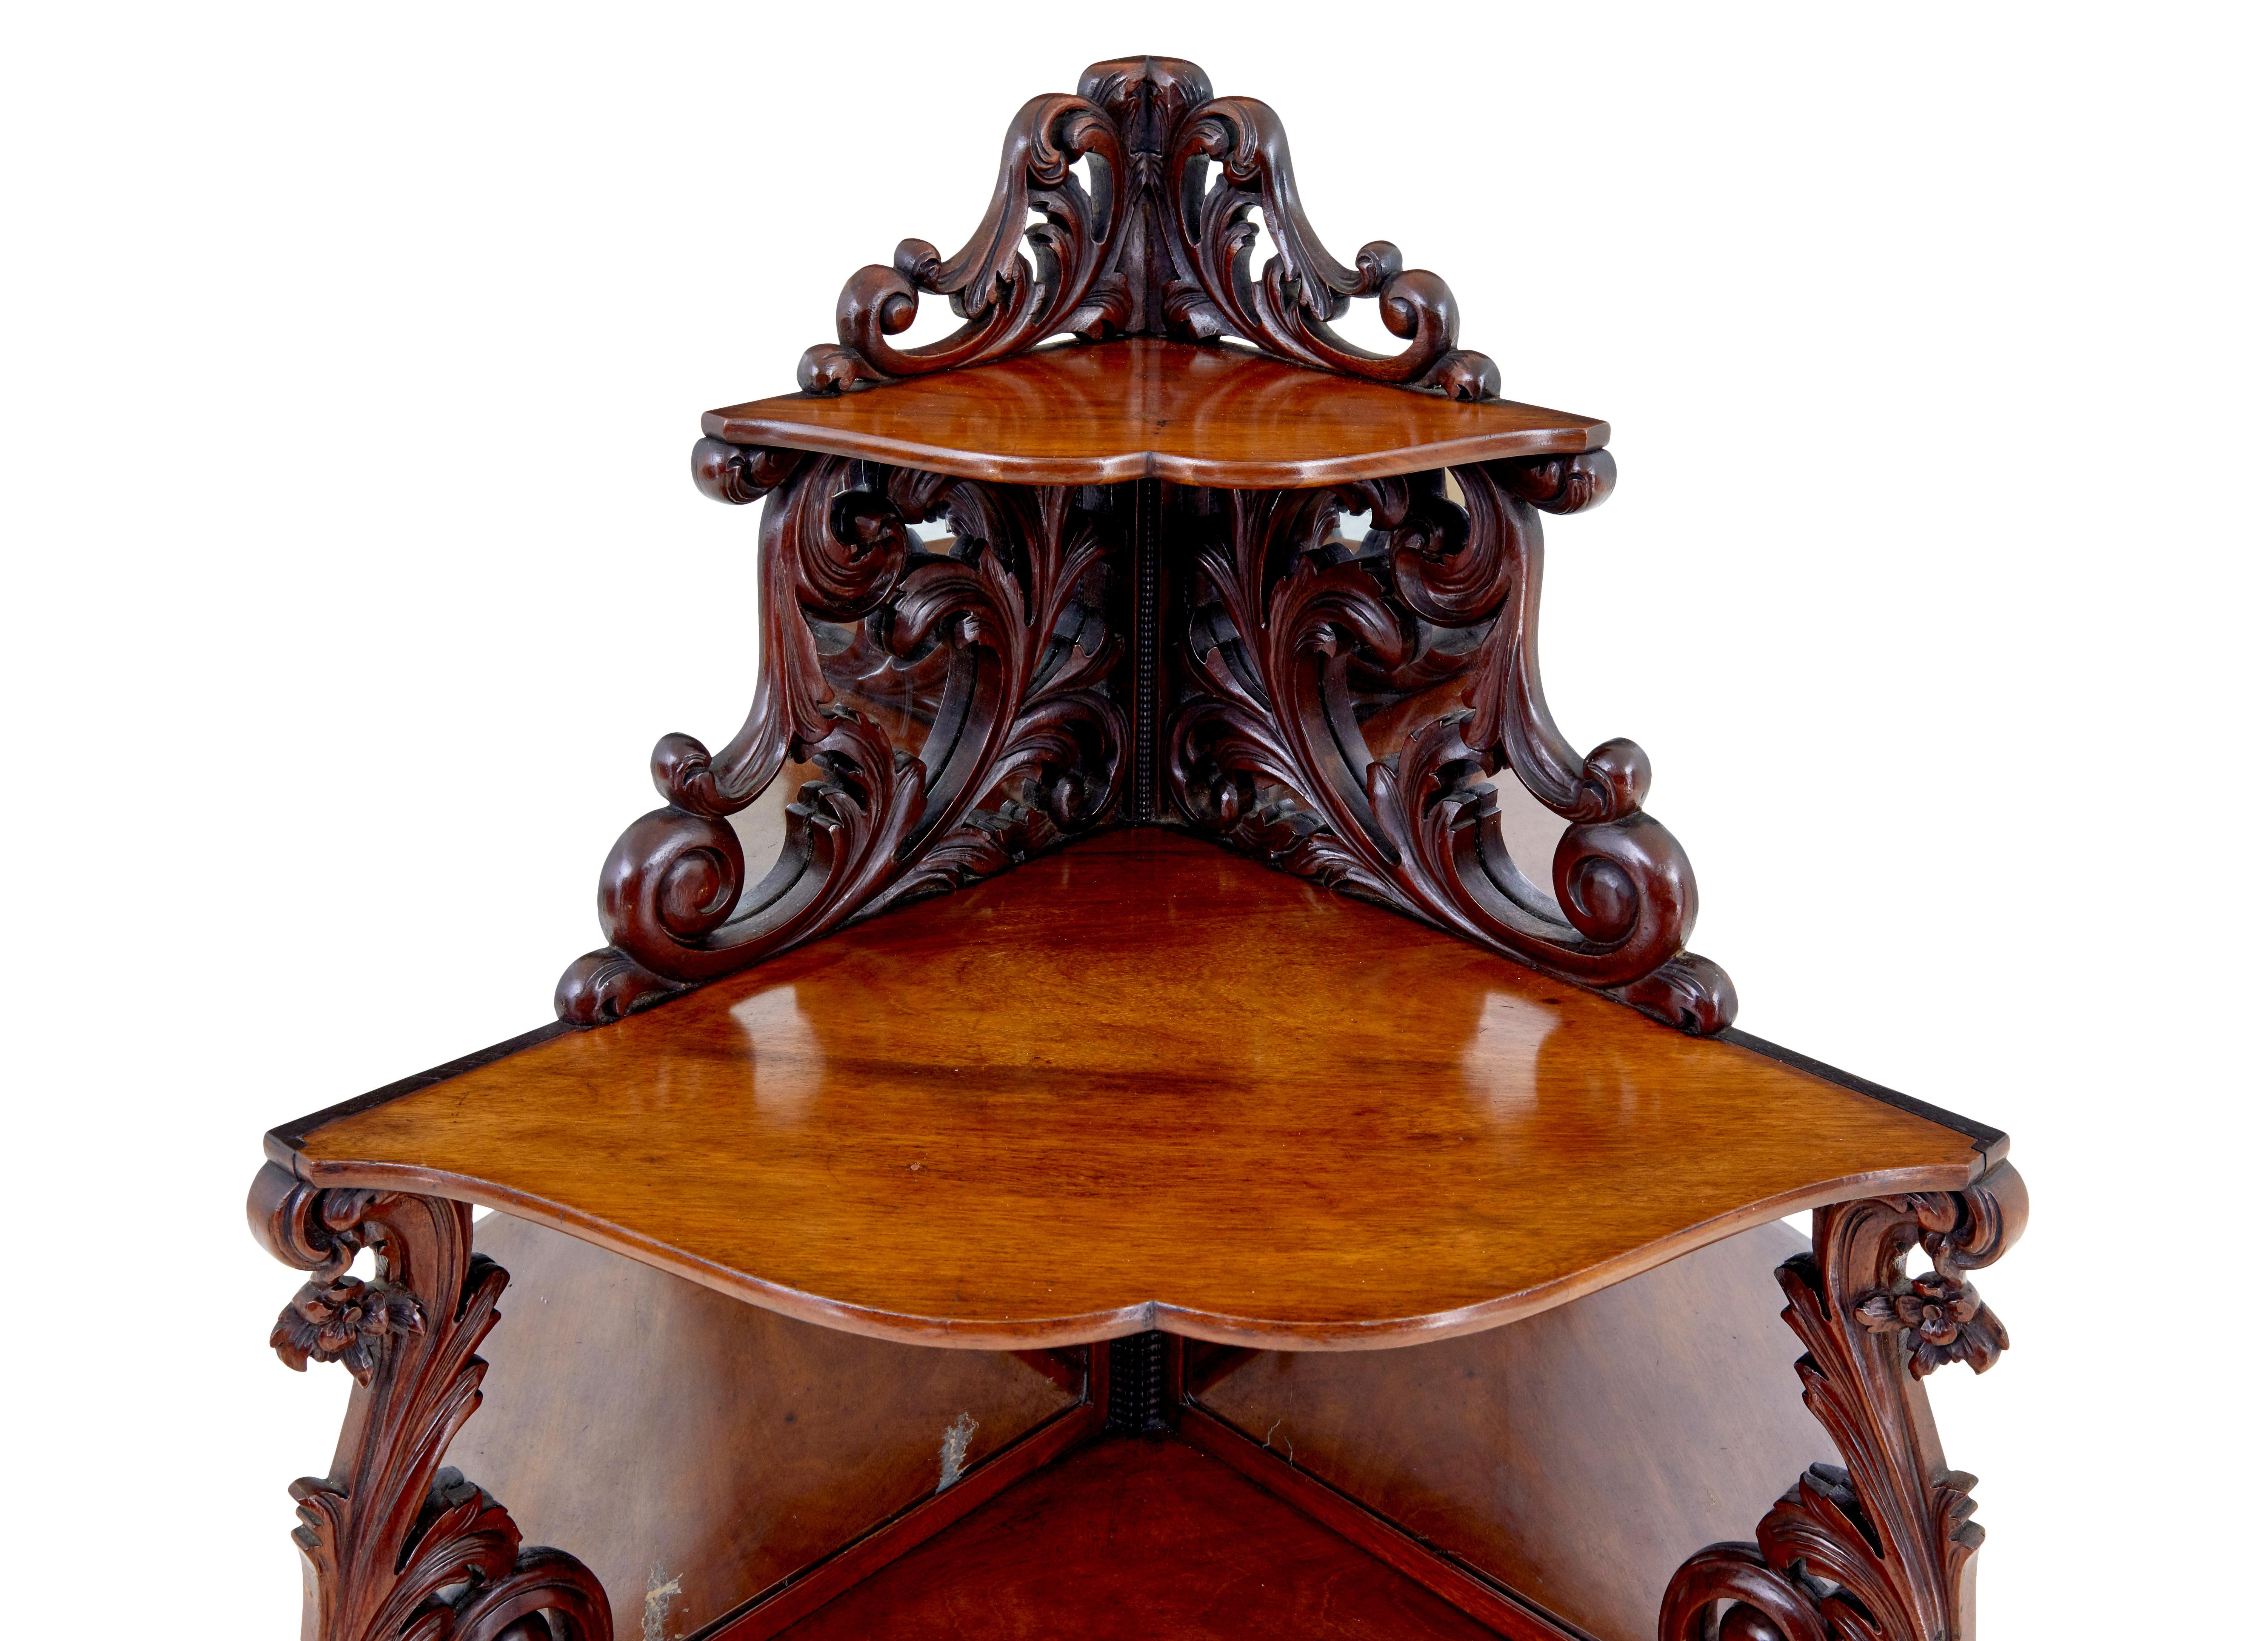 19th century carved mahogany victorian mirrored whatnot circa 1890.

Ornate 5 tier corner whatnot made in mahogany. Each level decorated with pierced carved scrolls with mirrored backs behind the carving.

Standing on petit scrolled legs, ready to